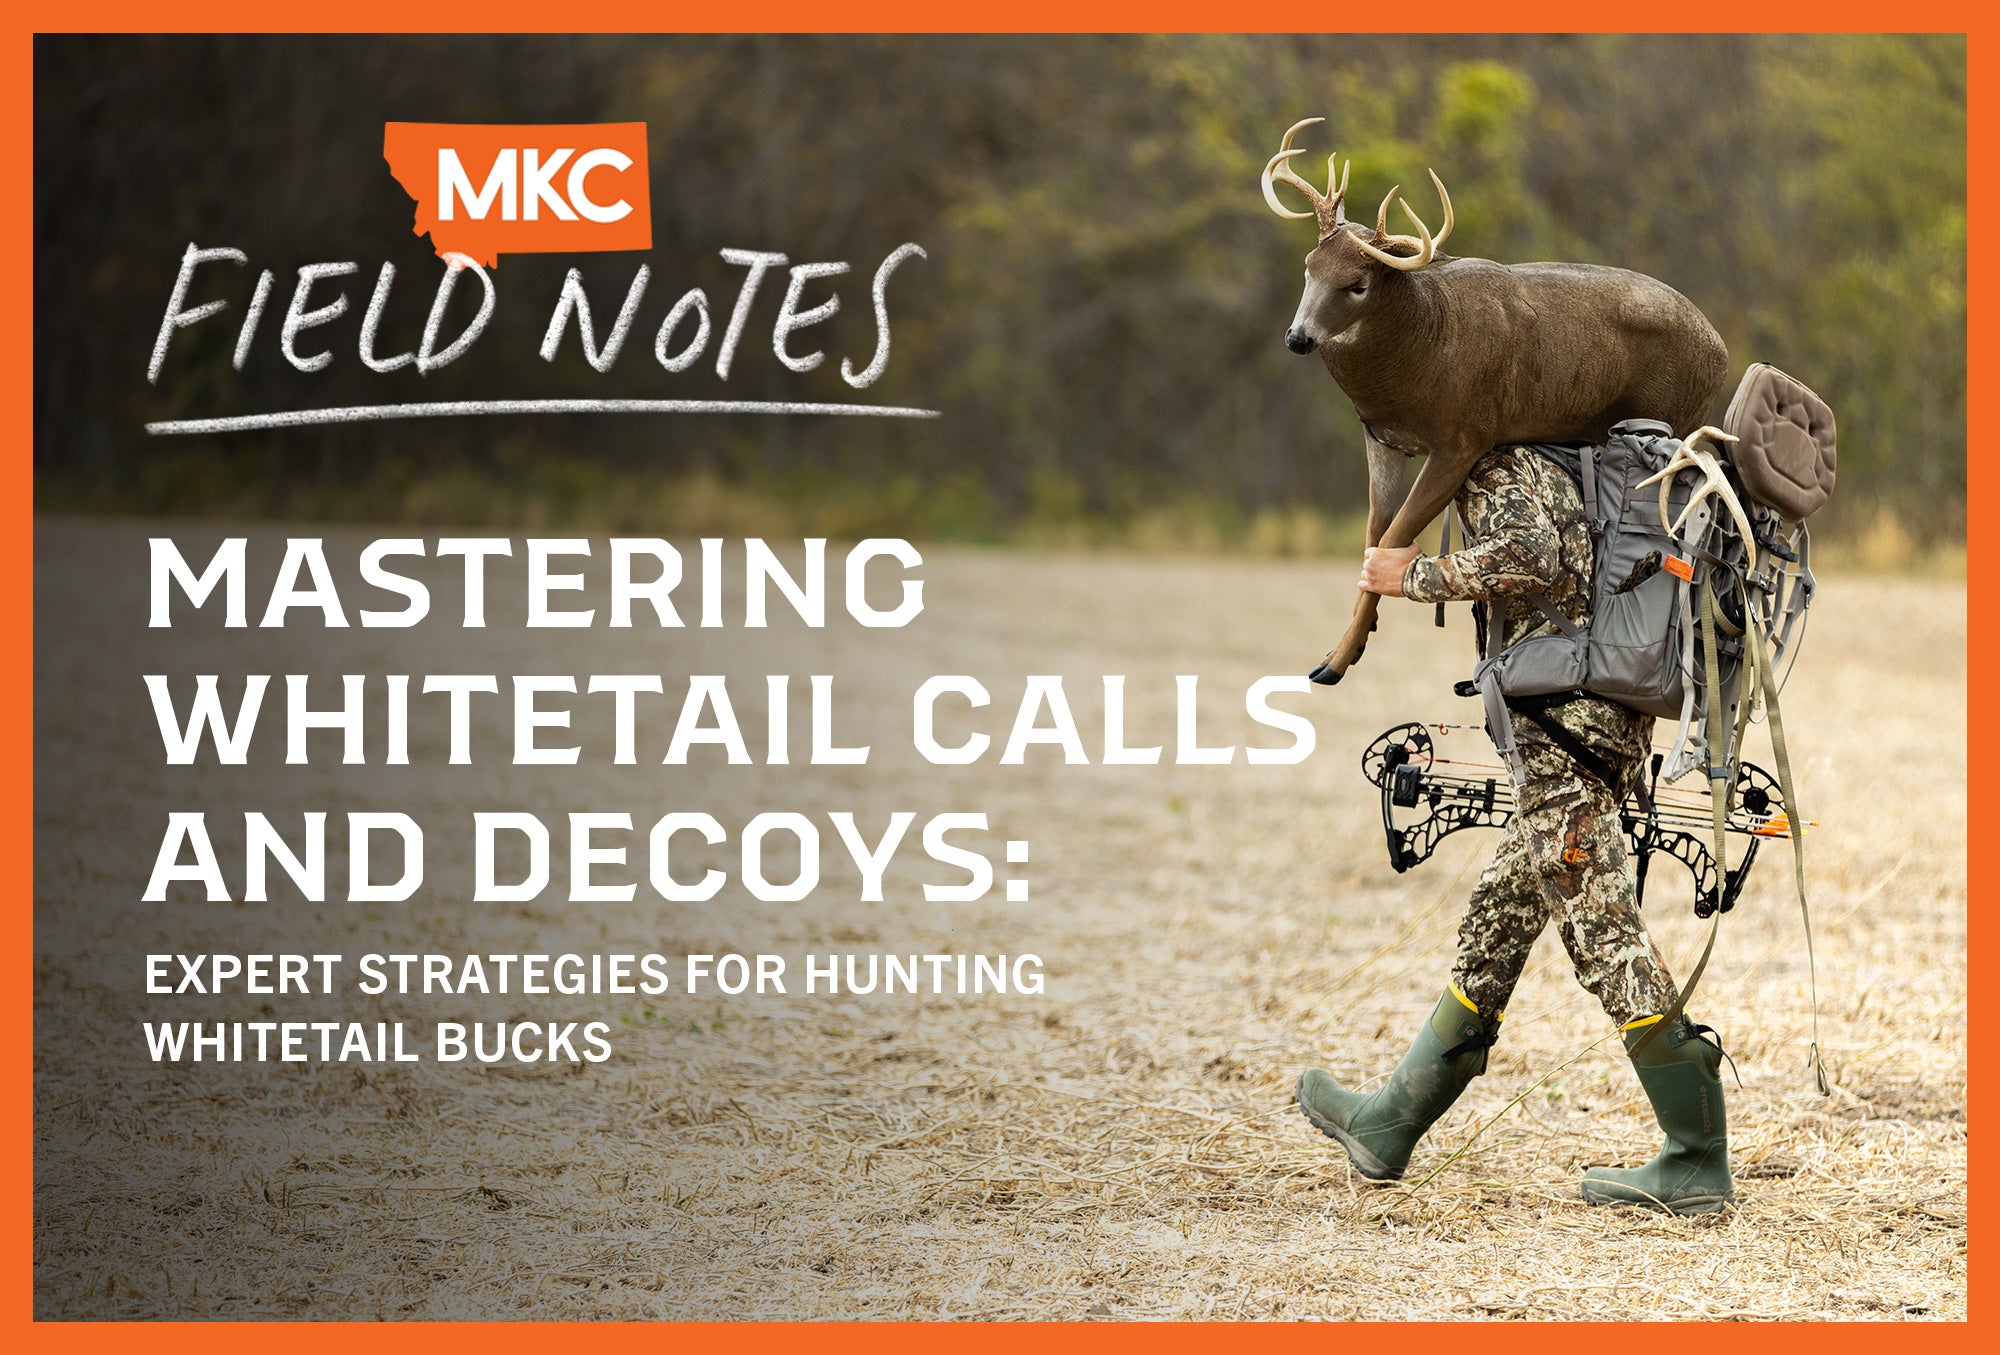 A hunter is carrying a deer over his shoulders with an overlay of “Mastering Whitetail Calls and Decoys: Expert Strategies for Hunting Whitetail Bucks.”